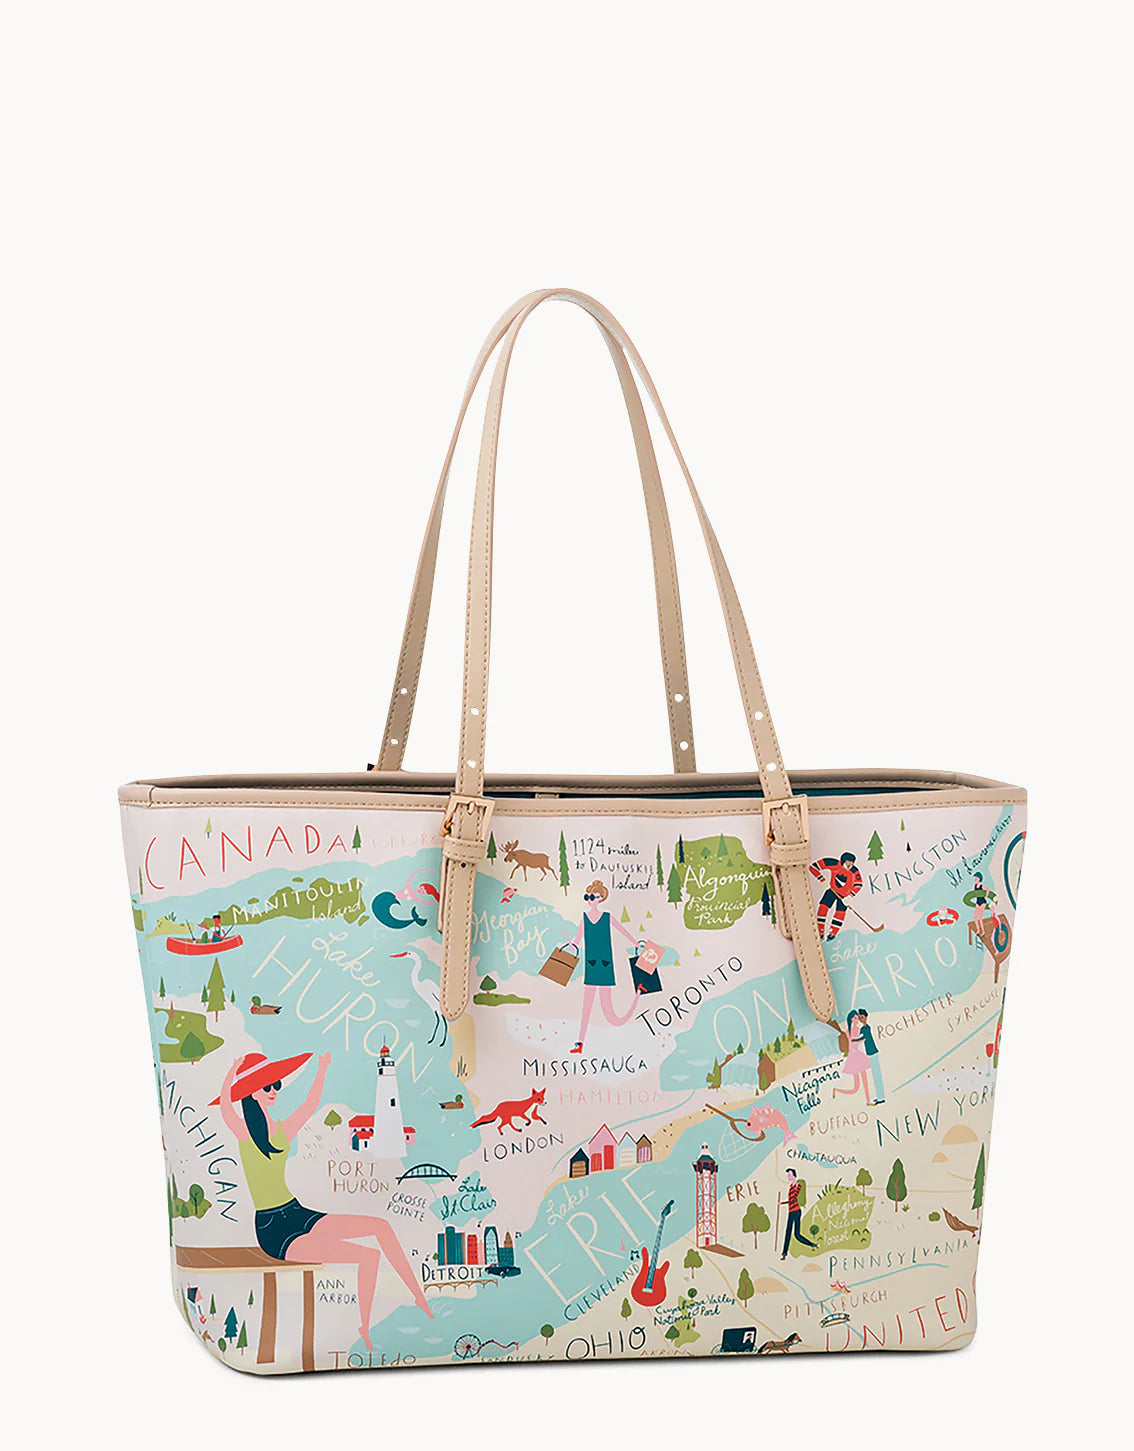 Great Lakes Tote